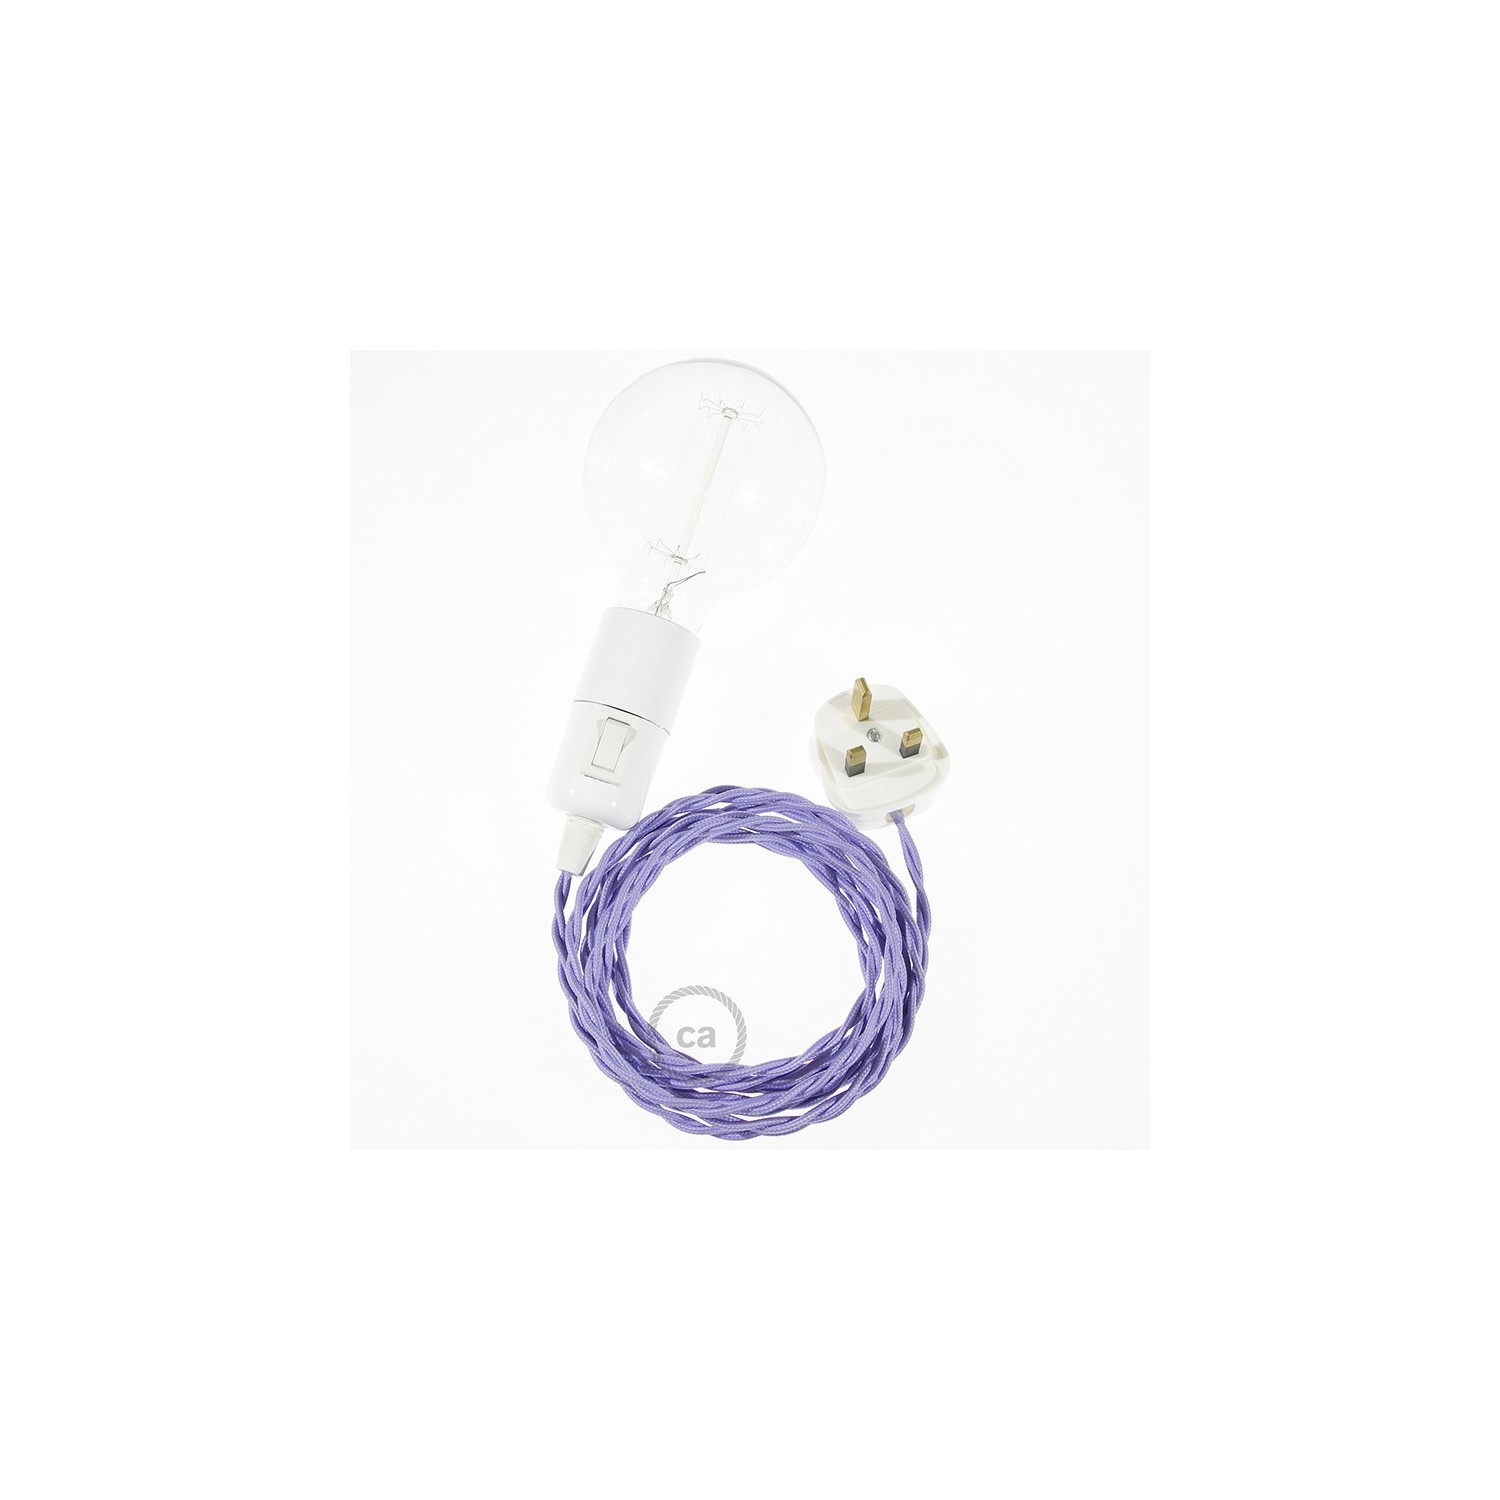 Create your TM07 Lilac Rayon Snake and bring the light wherever you want.